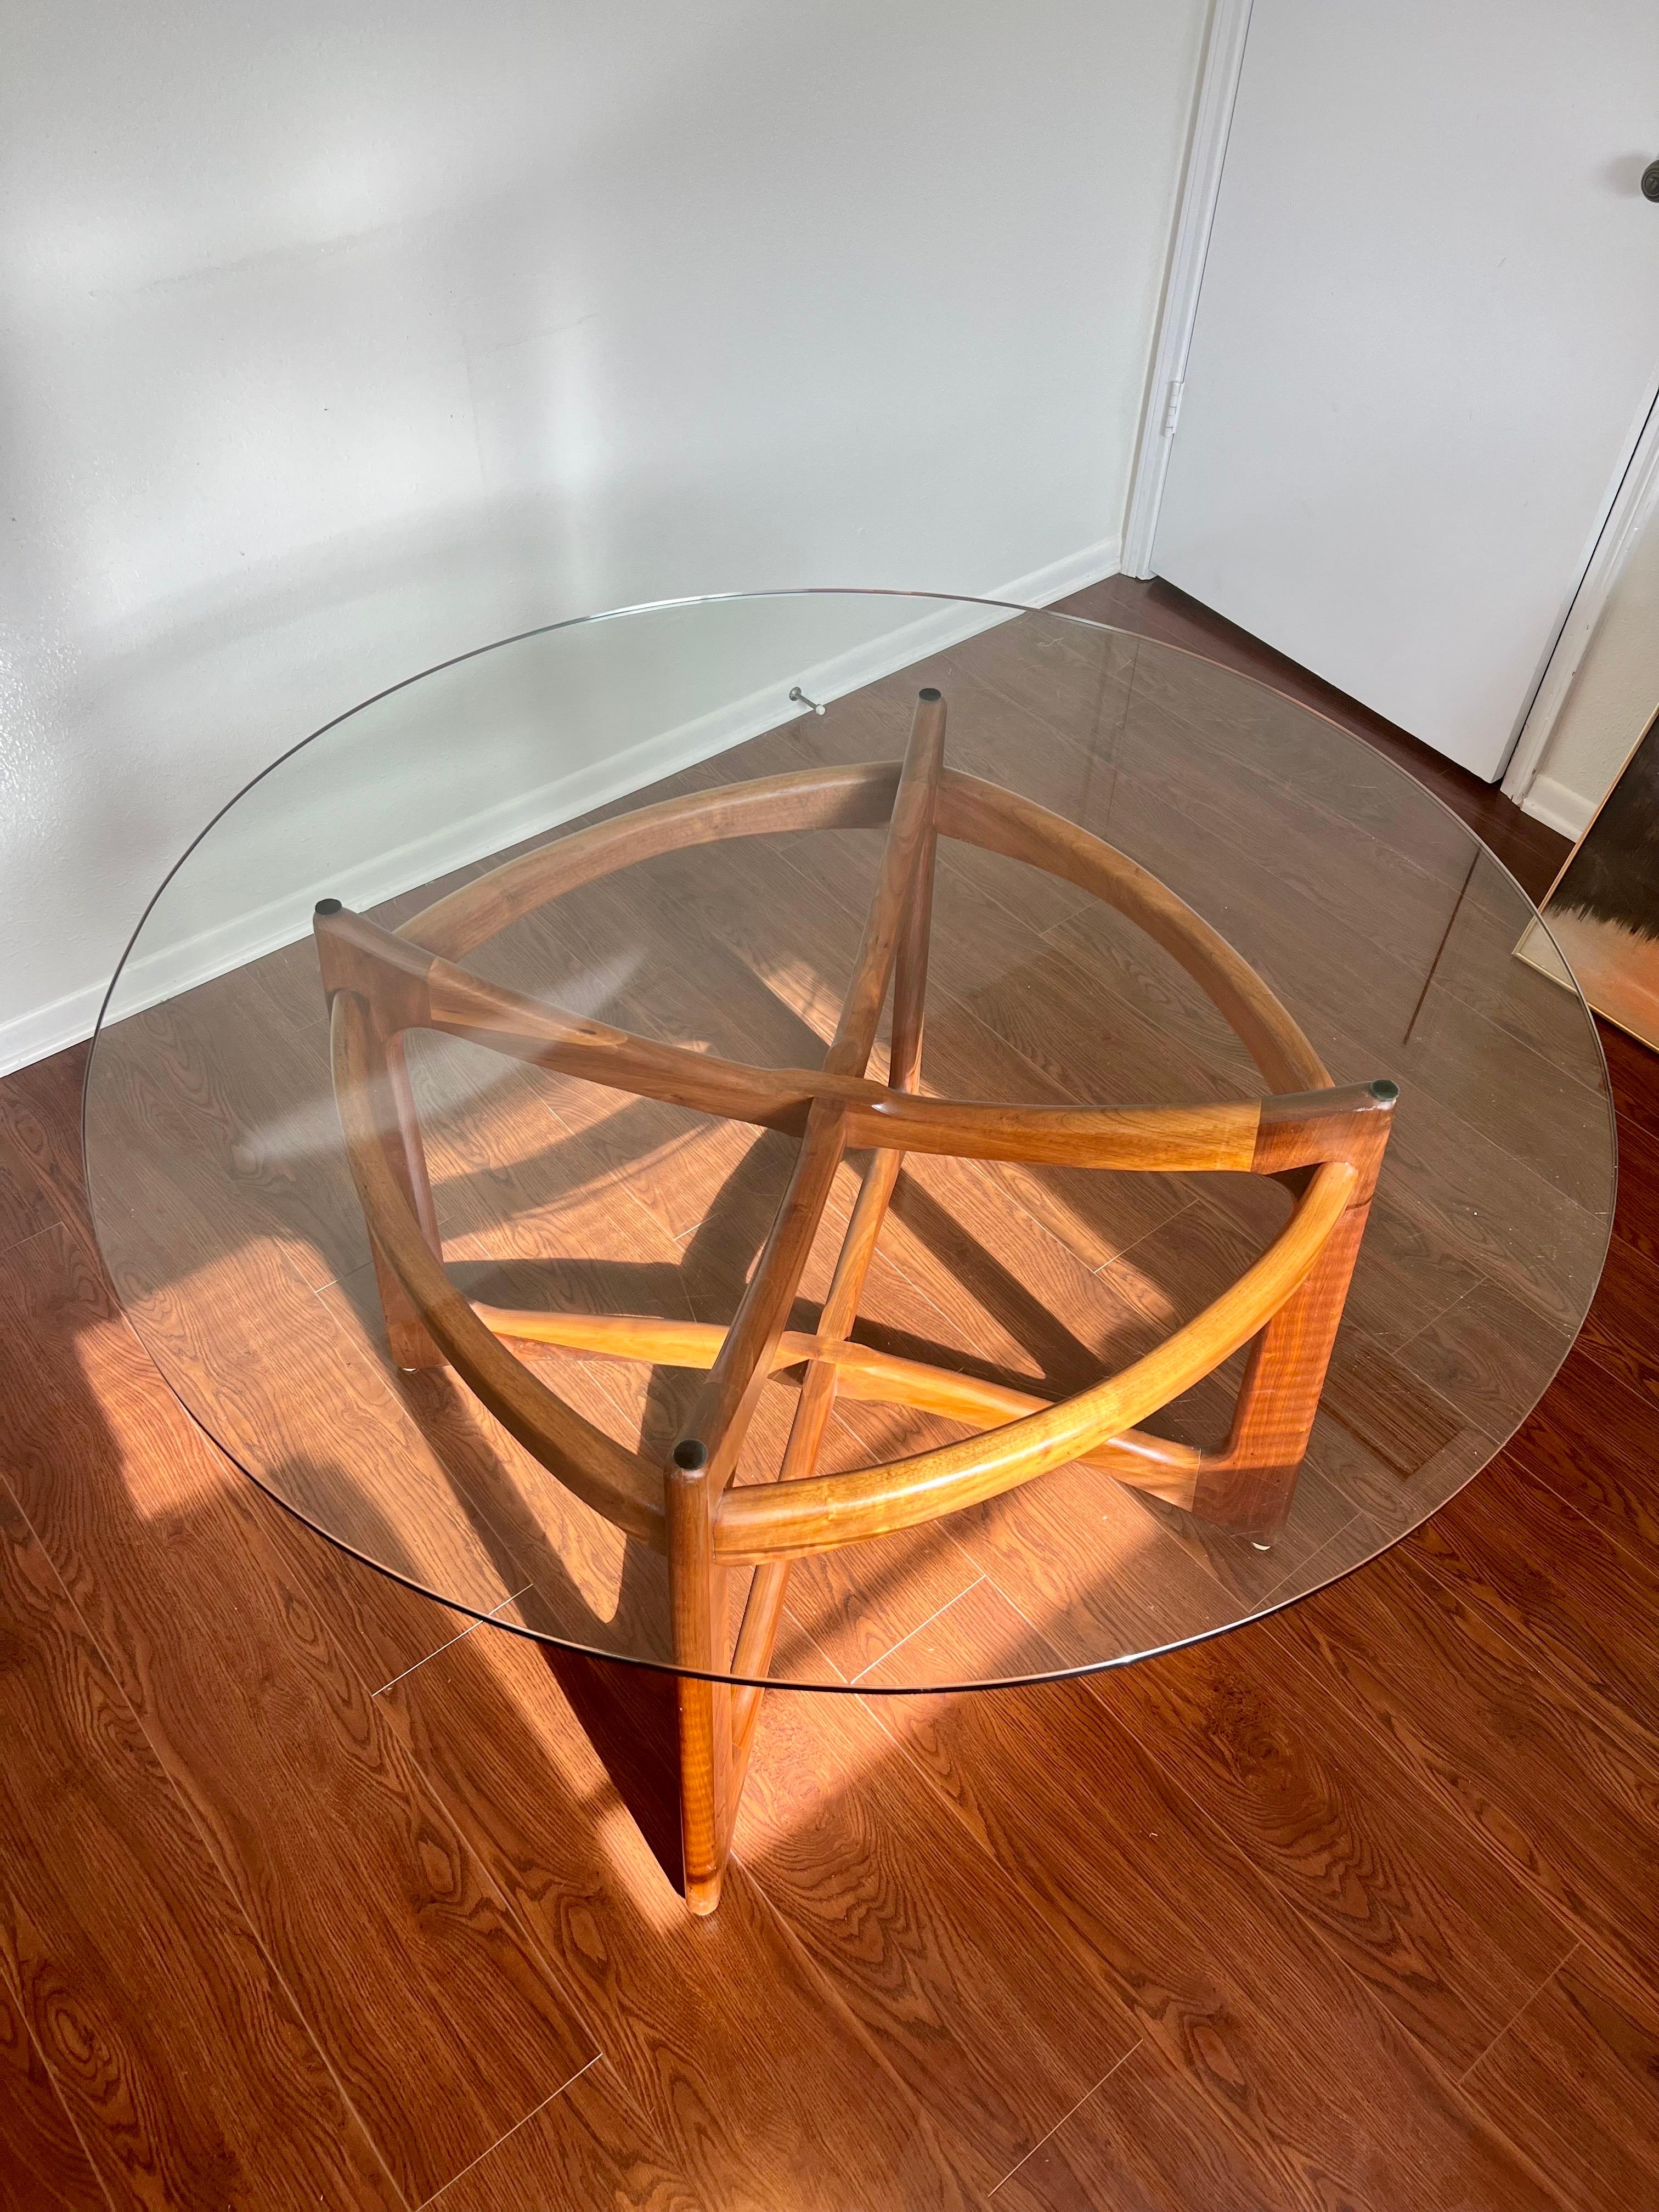 Vintage compass dining table model no. 2458-T48 designed by Adrian Pearsall of Craft Associates. This sculptural piece is constructed of solid walnut and includes the original pencil edge glass top. In good/excellent condition with some minor